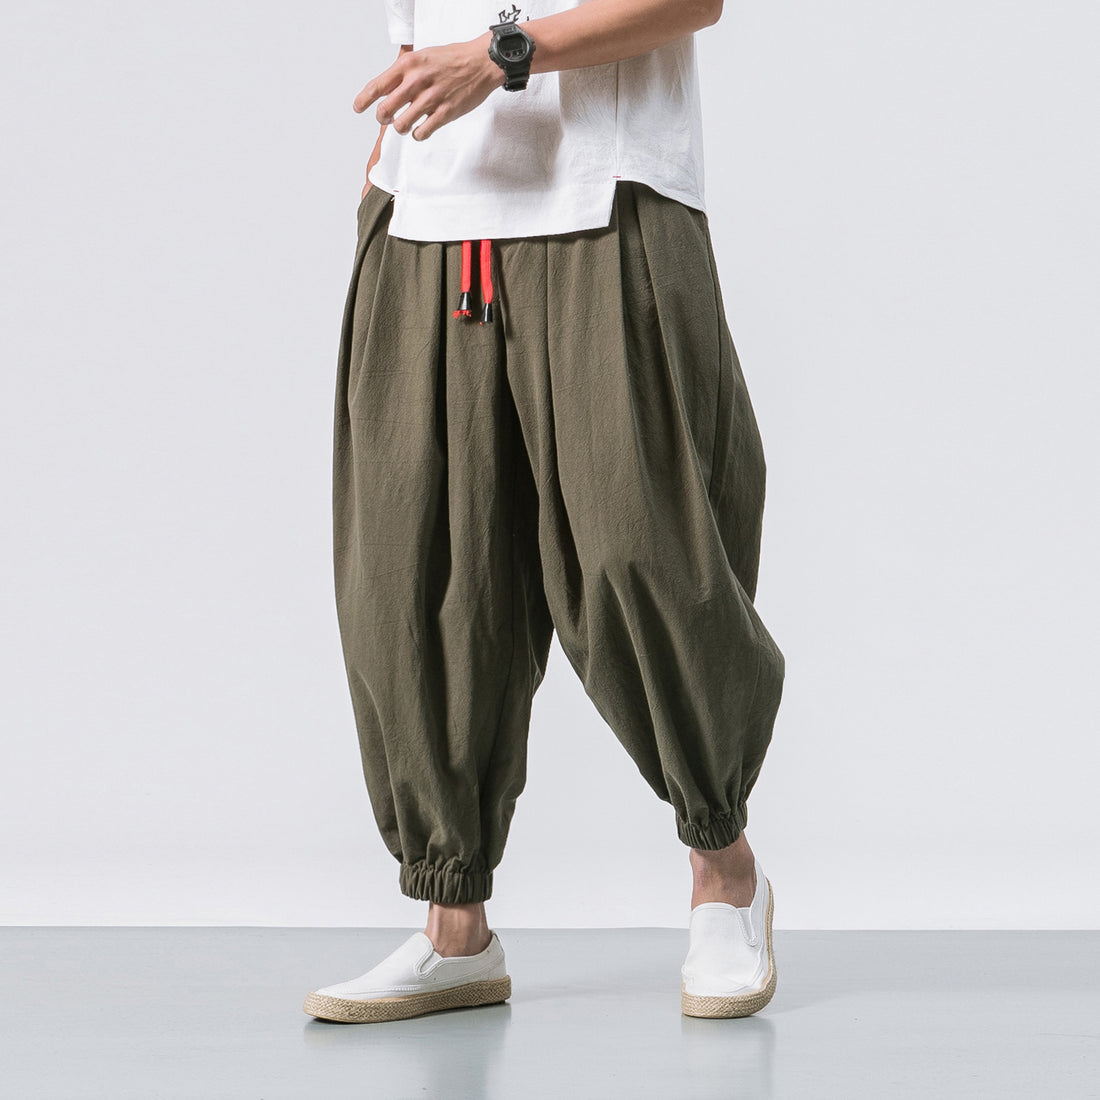 Four Seasons Cotton And Linen Trousers Loose Hanging Gear Men Flying Squirrel Pants Men